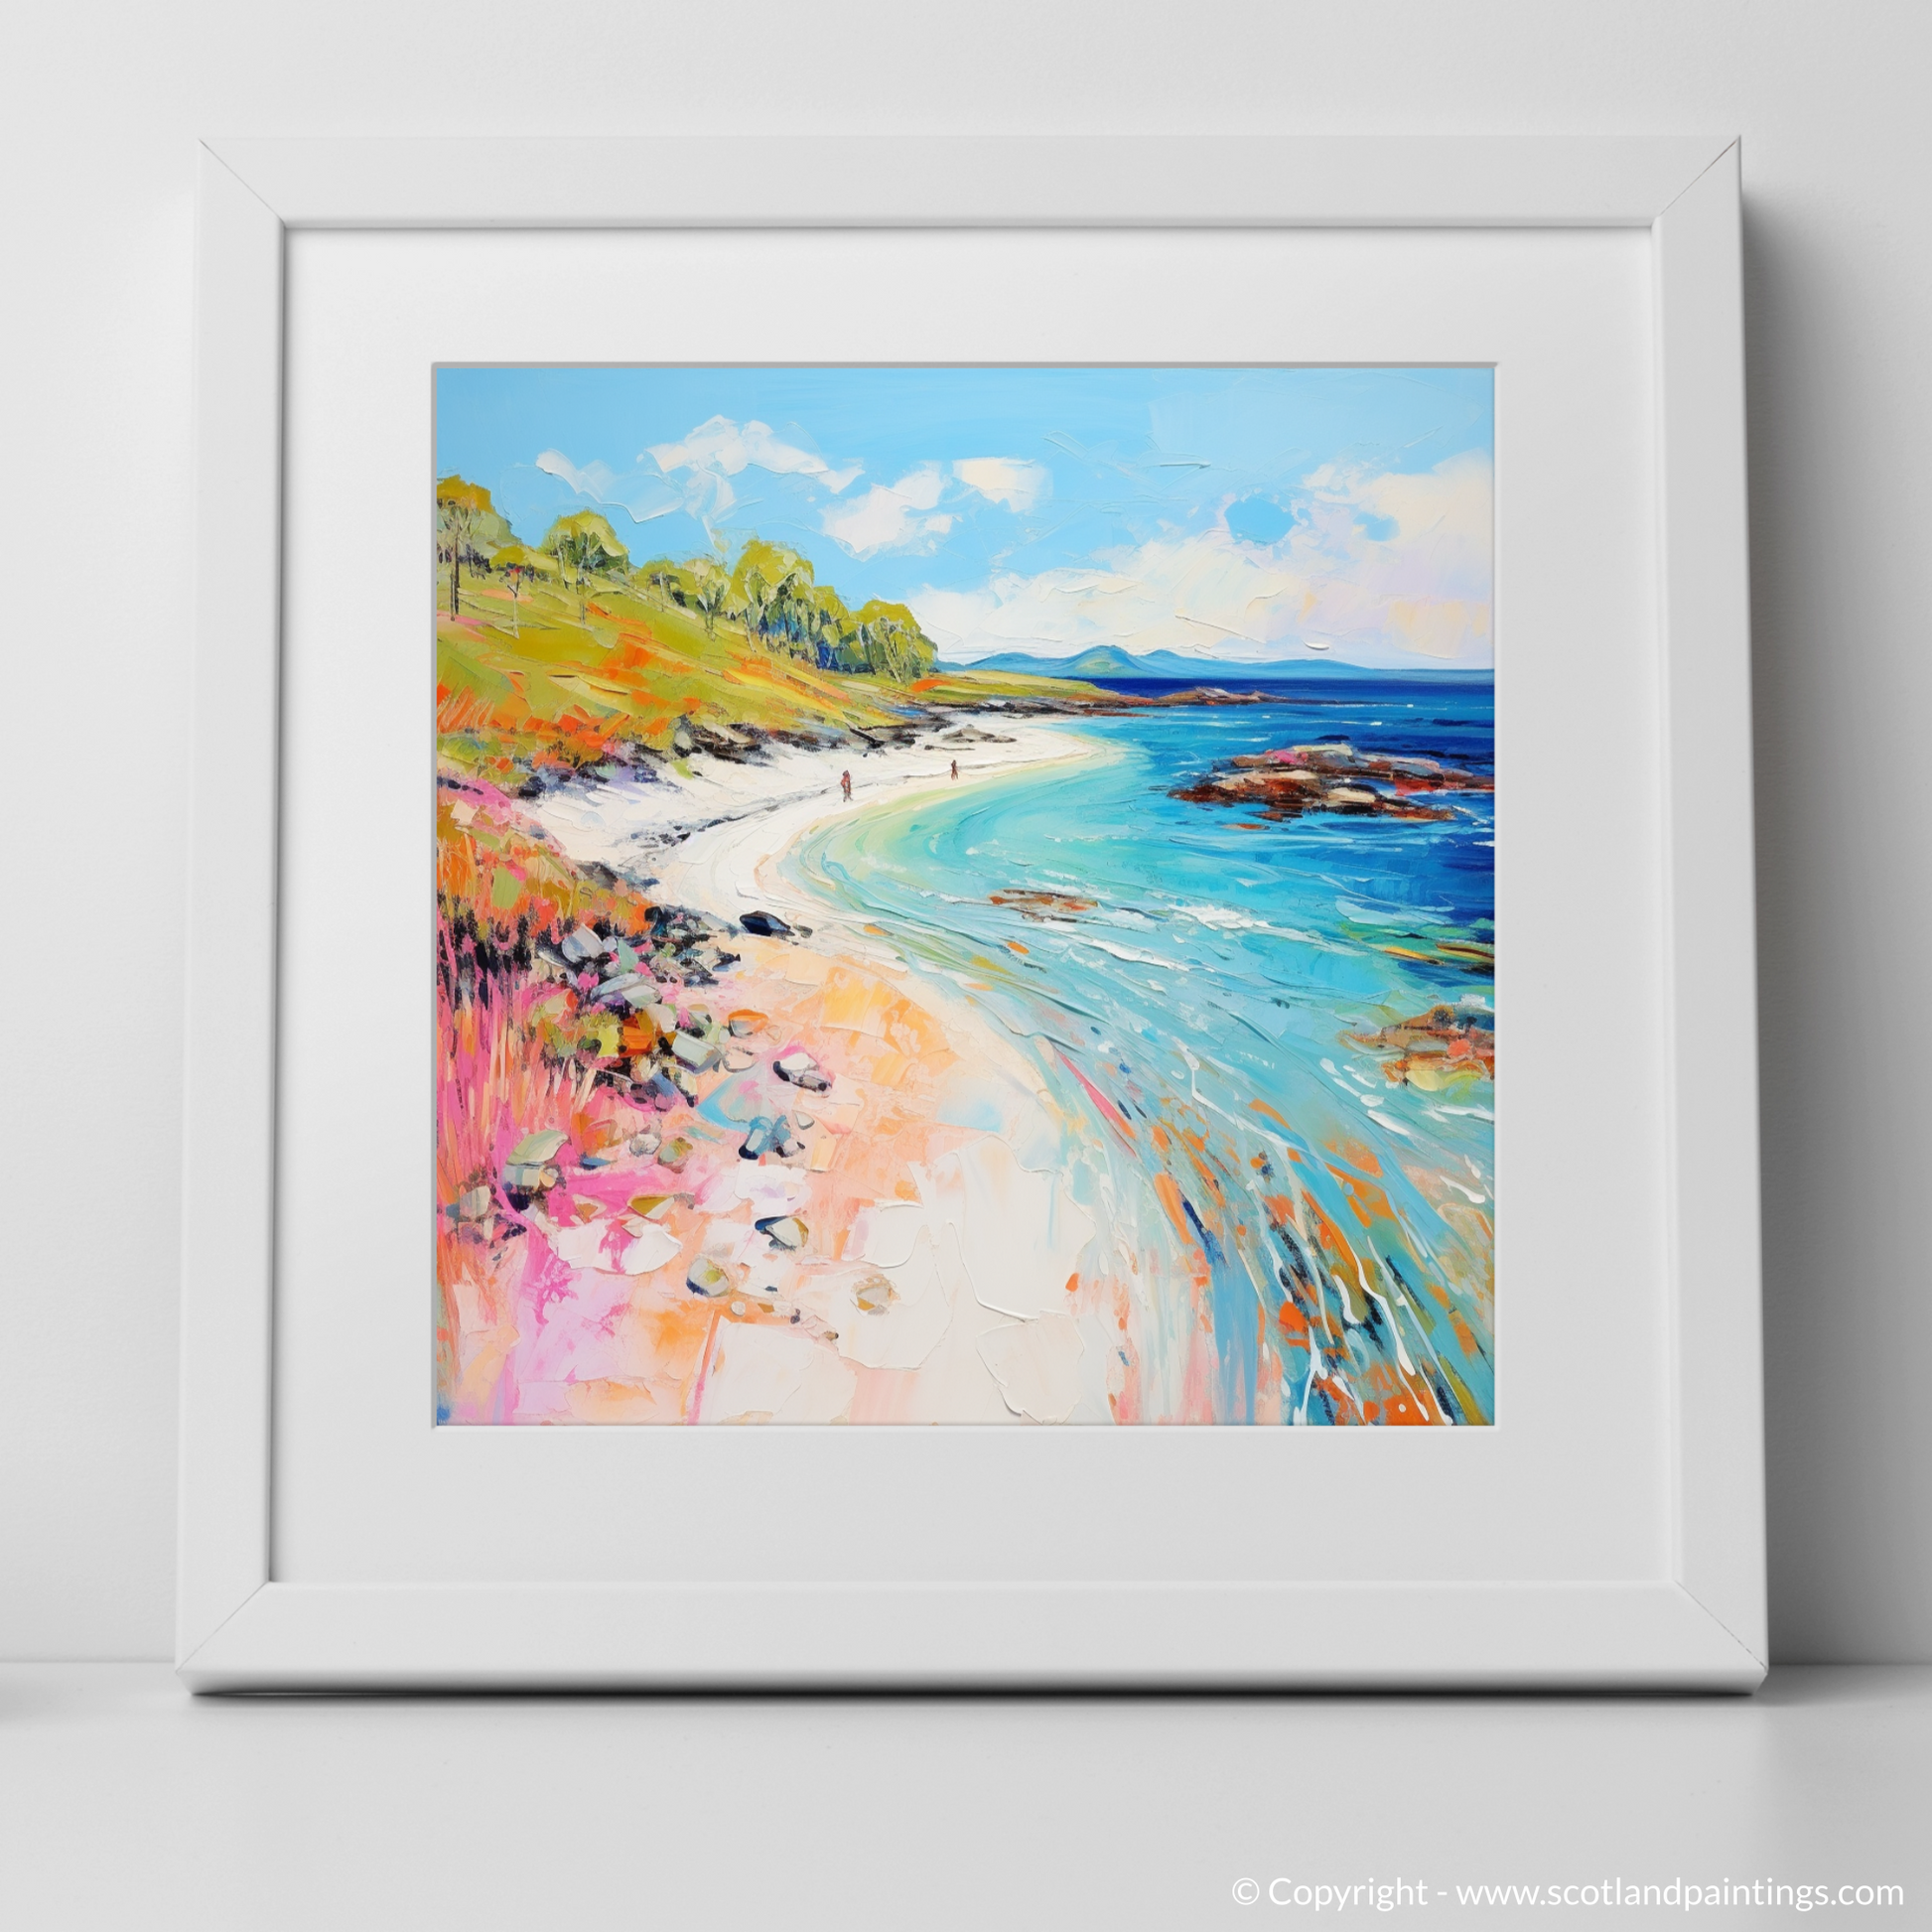 Art Print of Coral Beach, Isle of Skye in summer with a white frame